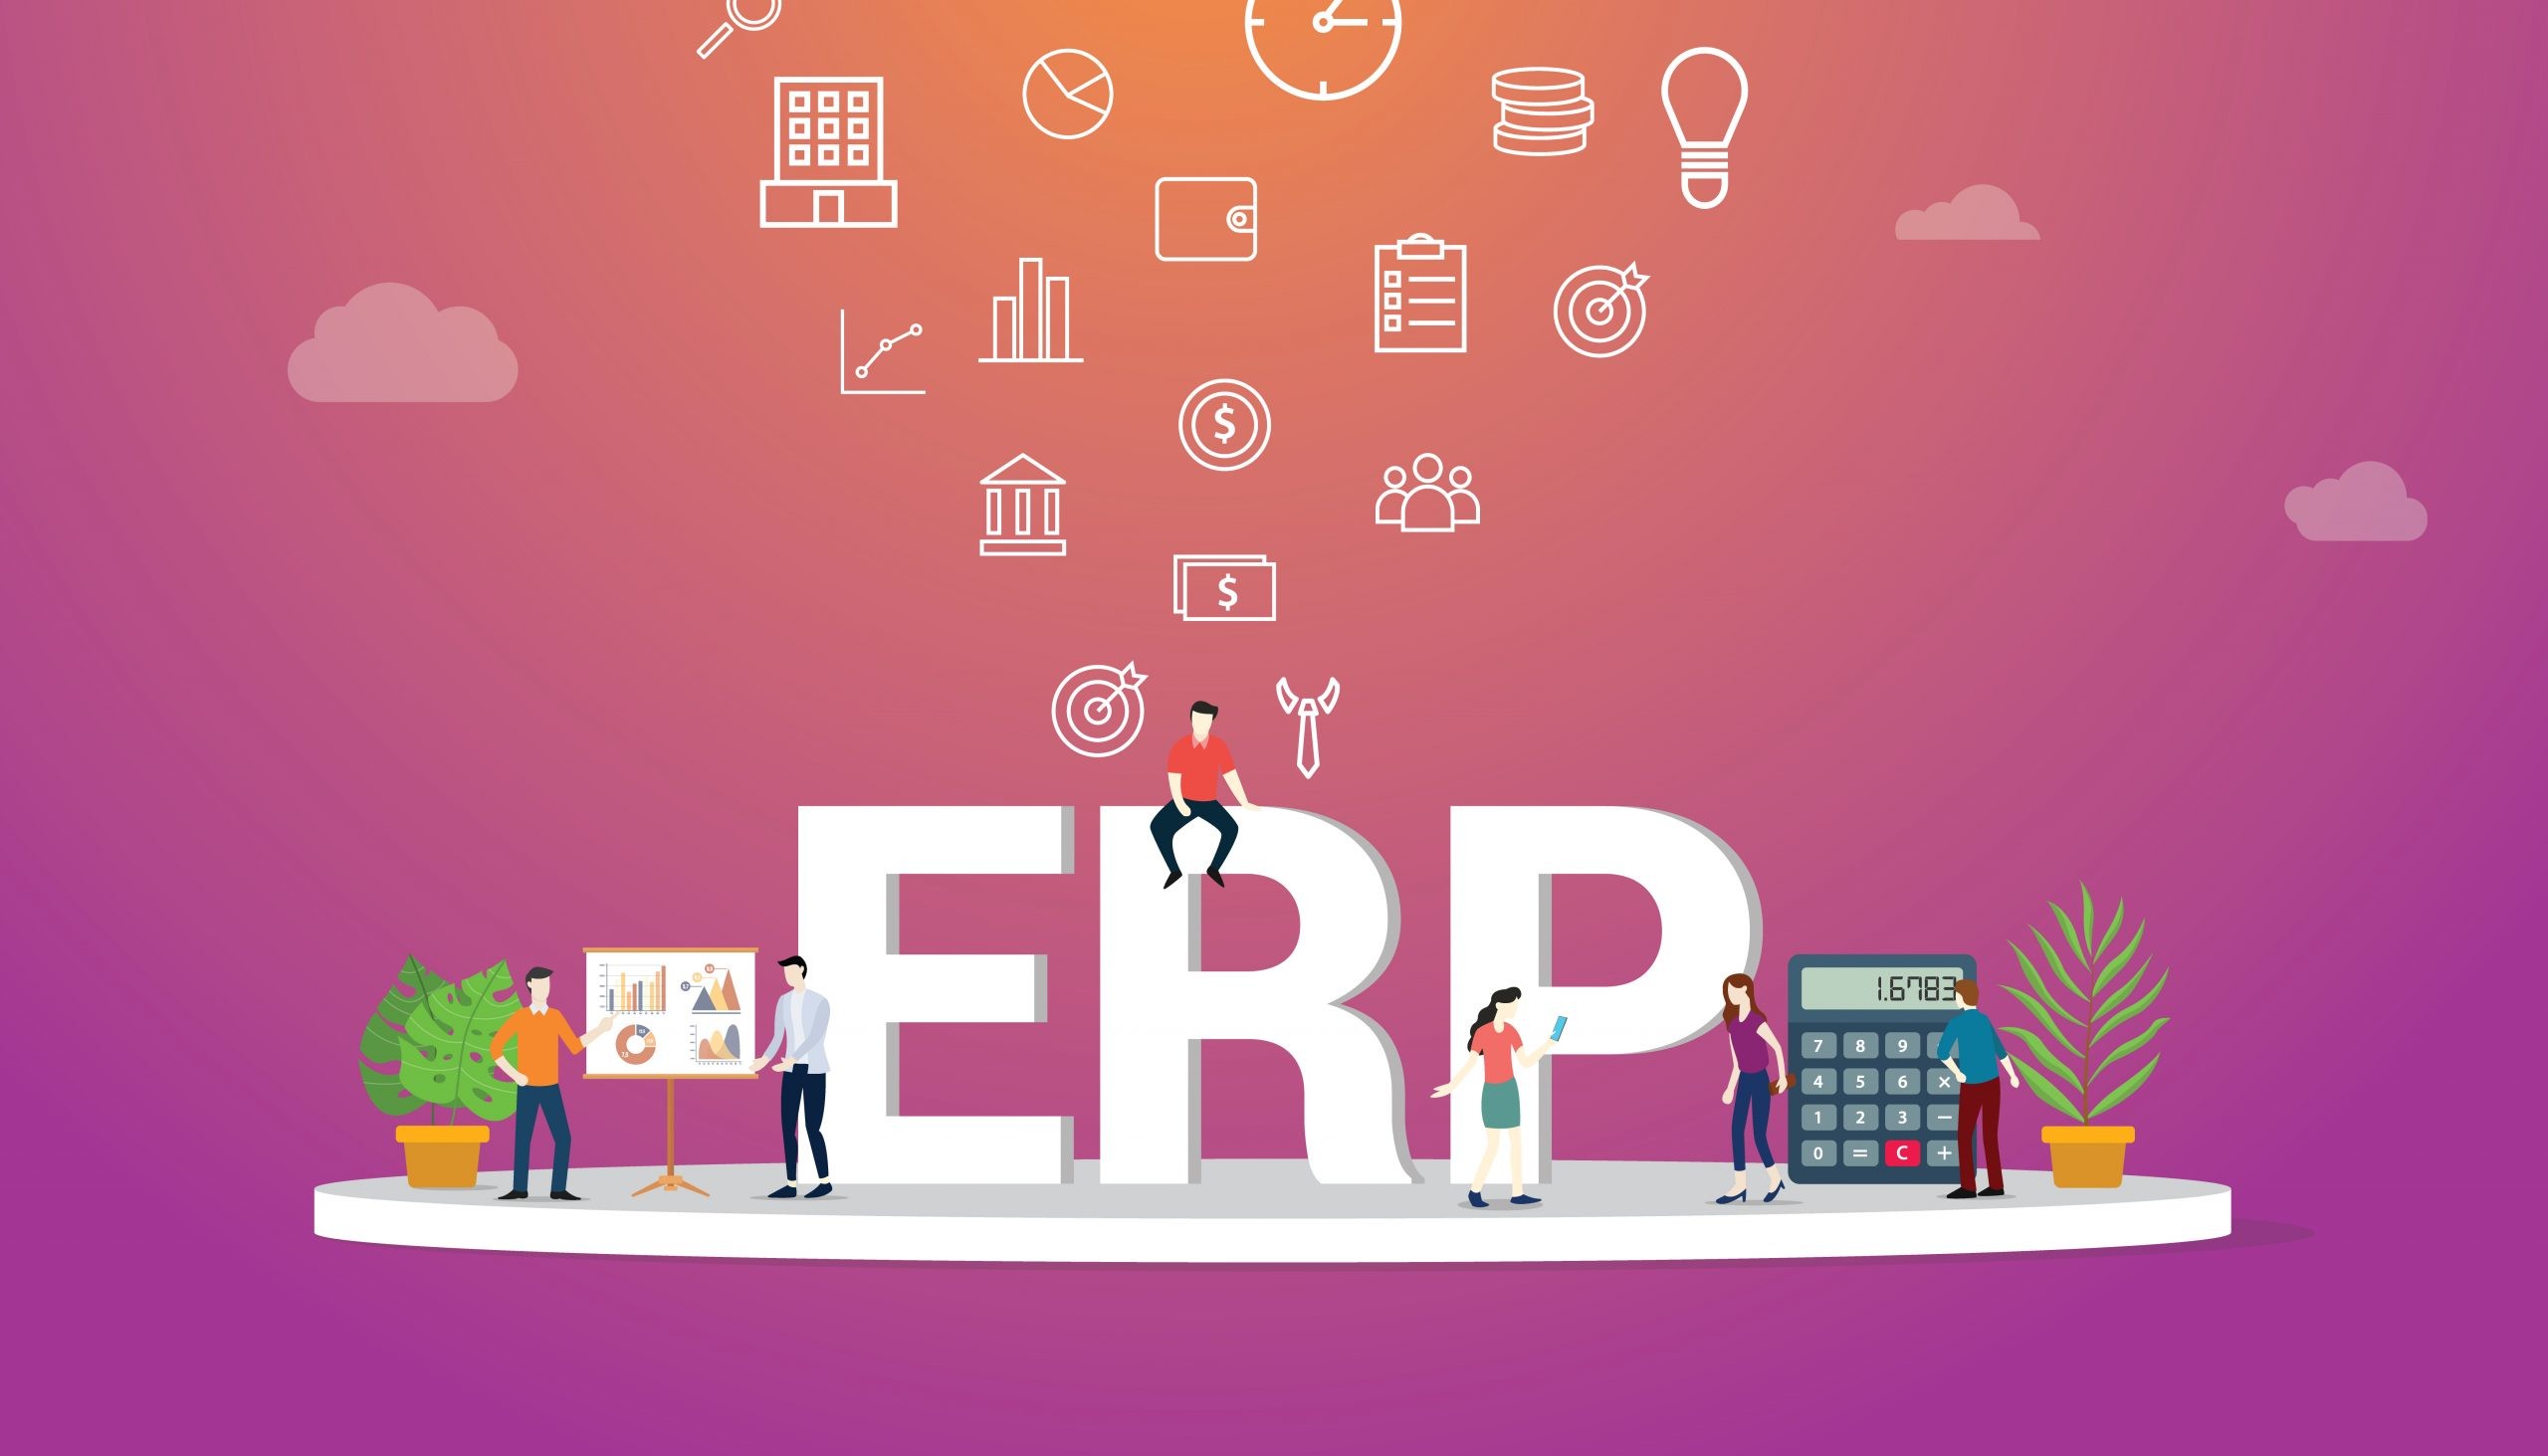 gestiona-ecommerce-con-software-erp